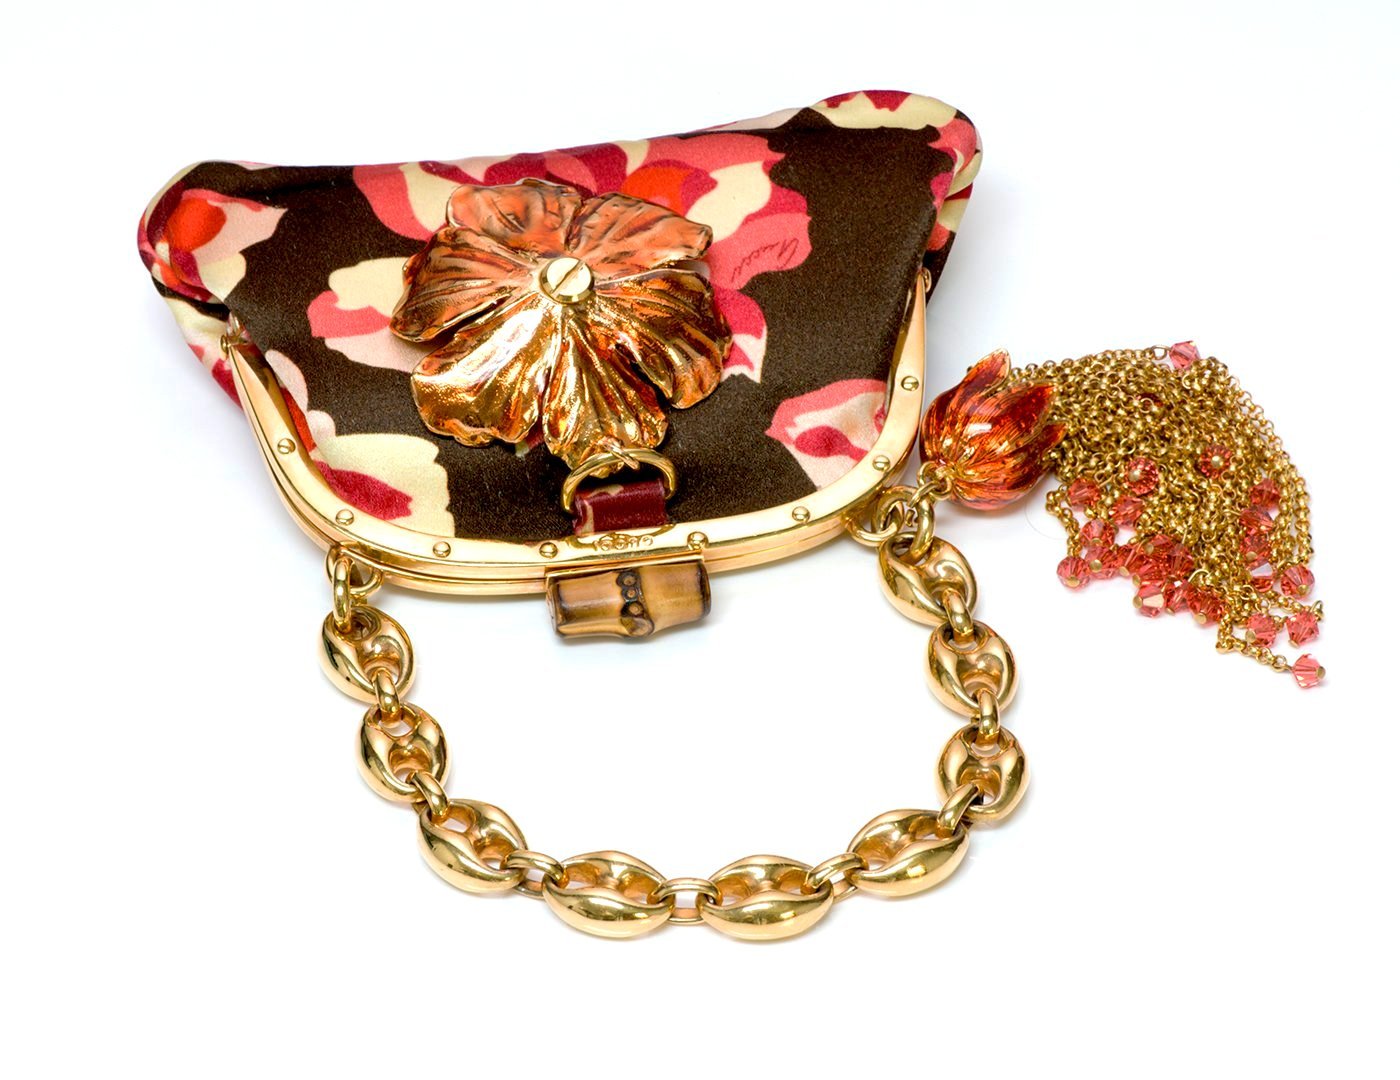 Gucci by Tom Ford Bamboo Satin Flower Bag